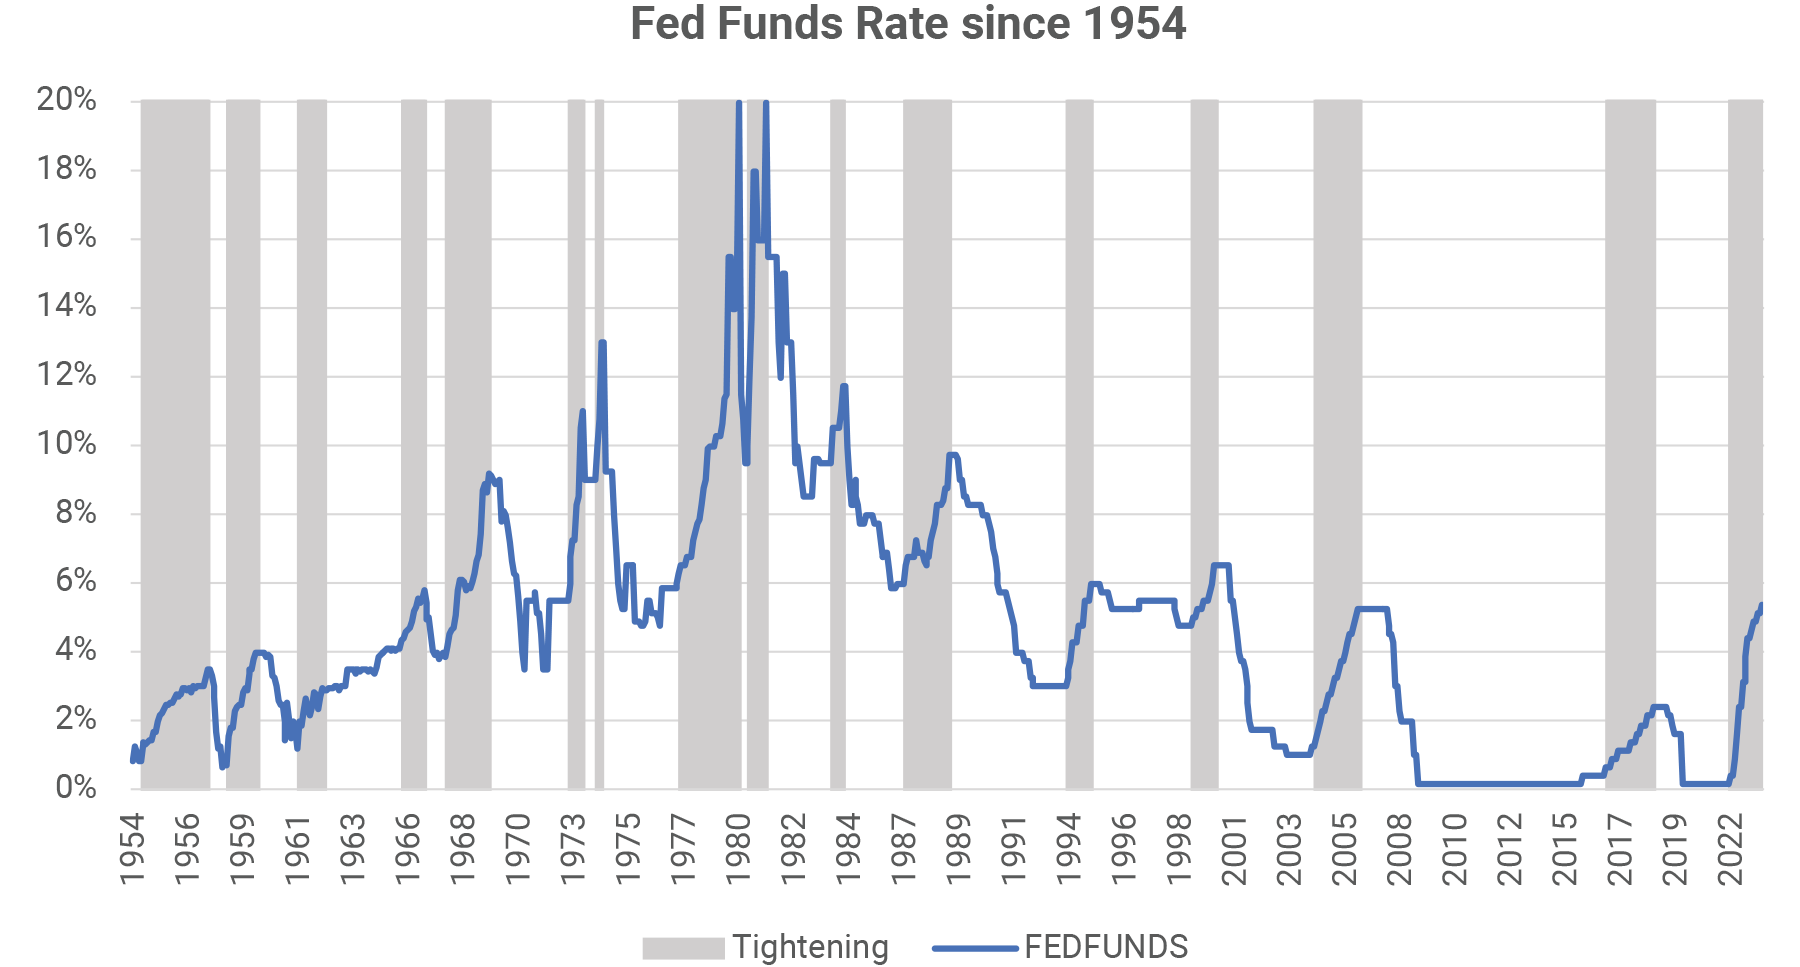 Fed Funds Rate since 1954